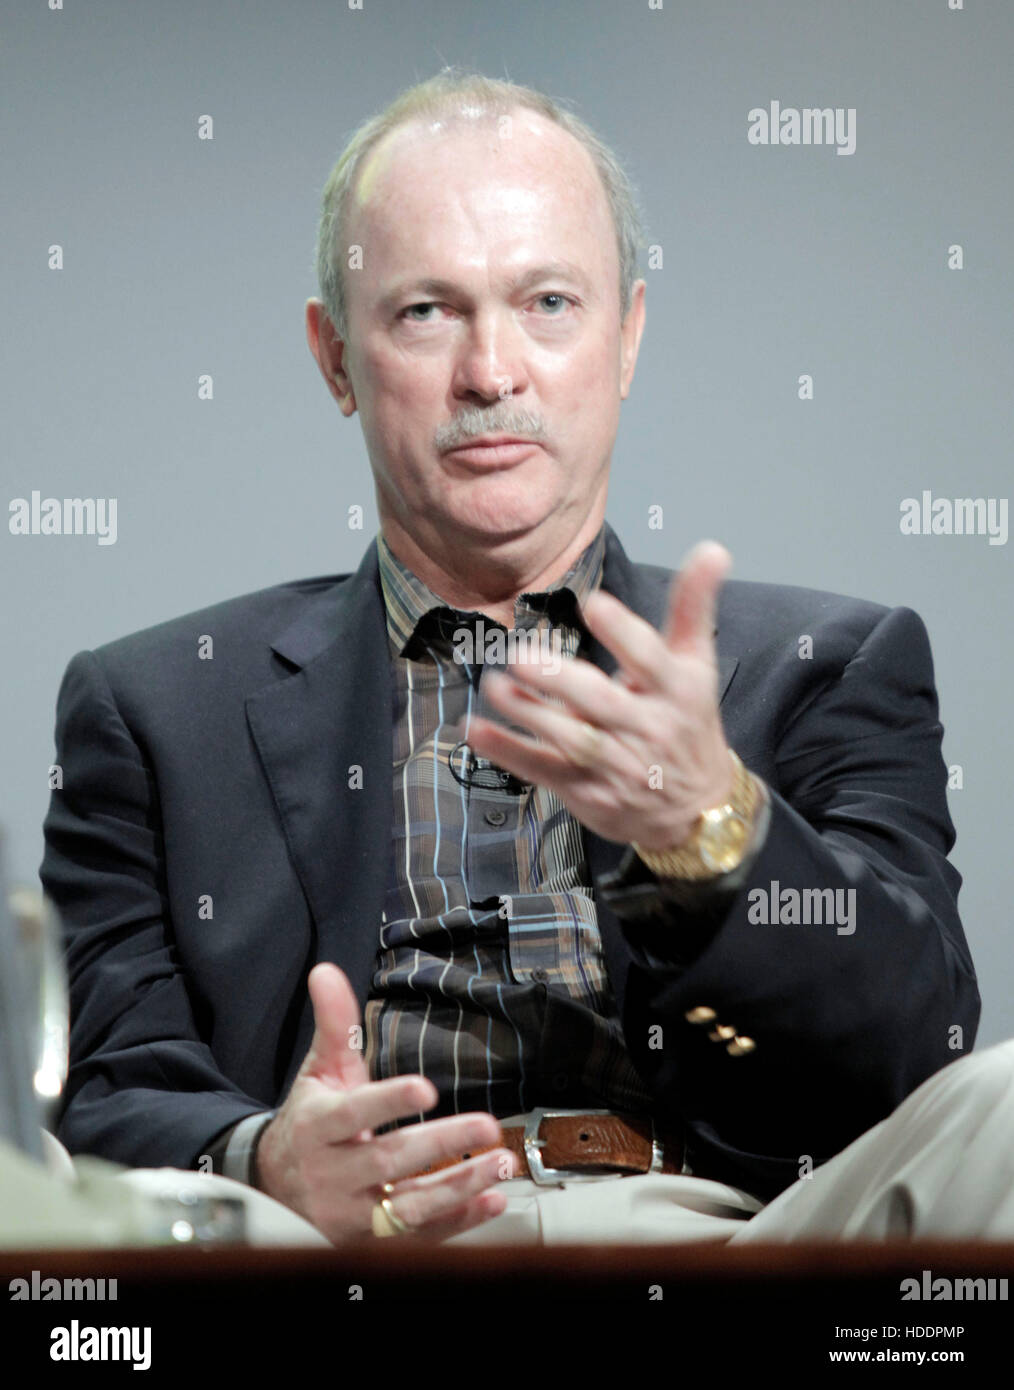 Ed White, chief advisor to EMC and former Chairman of Itron, speaks during the 2010 Ernst & Young Strategic Growth Forum in Palm Desert, California, on November 11, 2010.  Photo by Francis Specker Stock Photo